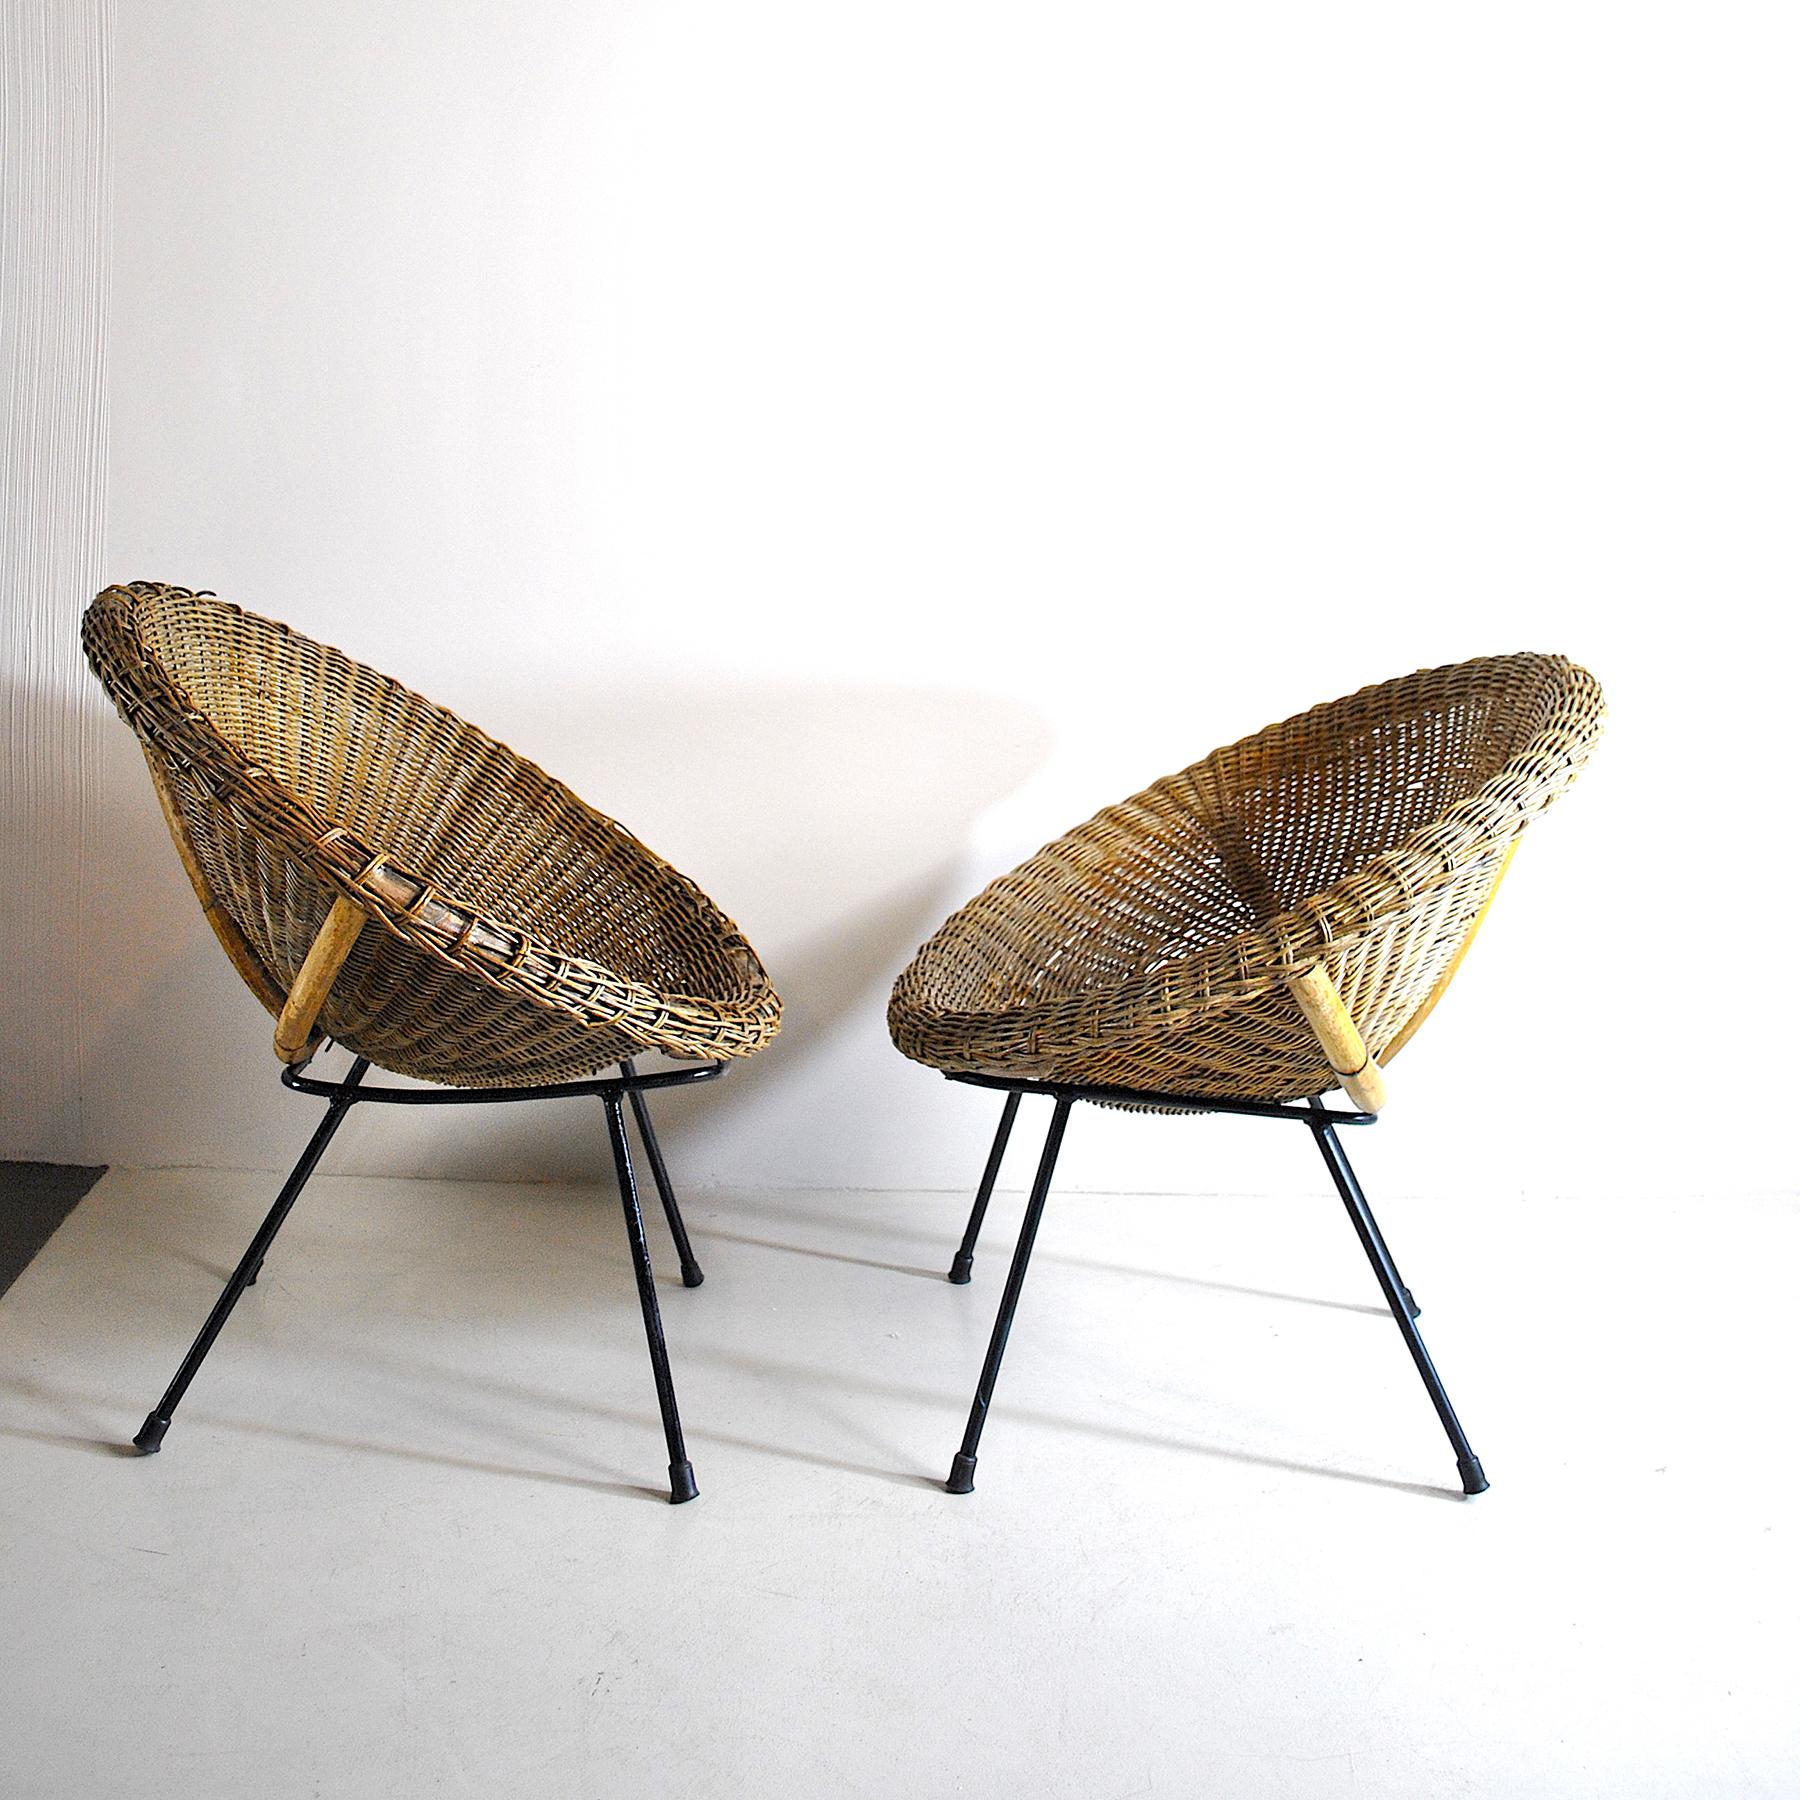 Italian Midcentury 1960s Eggs Cane Chairs For Sale 3